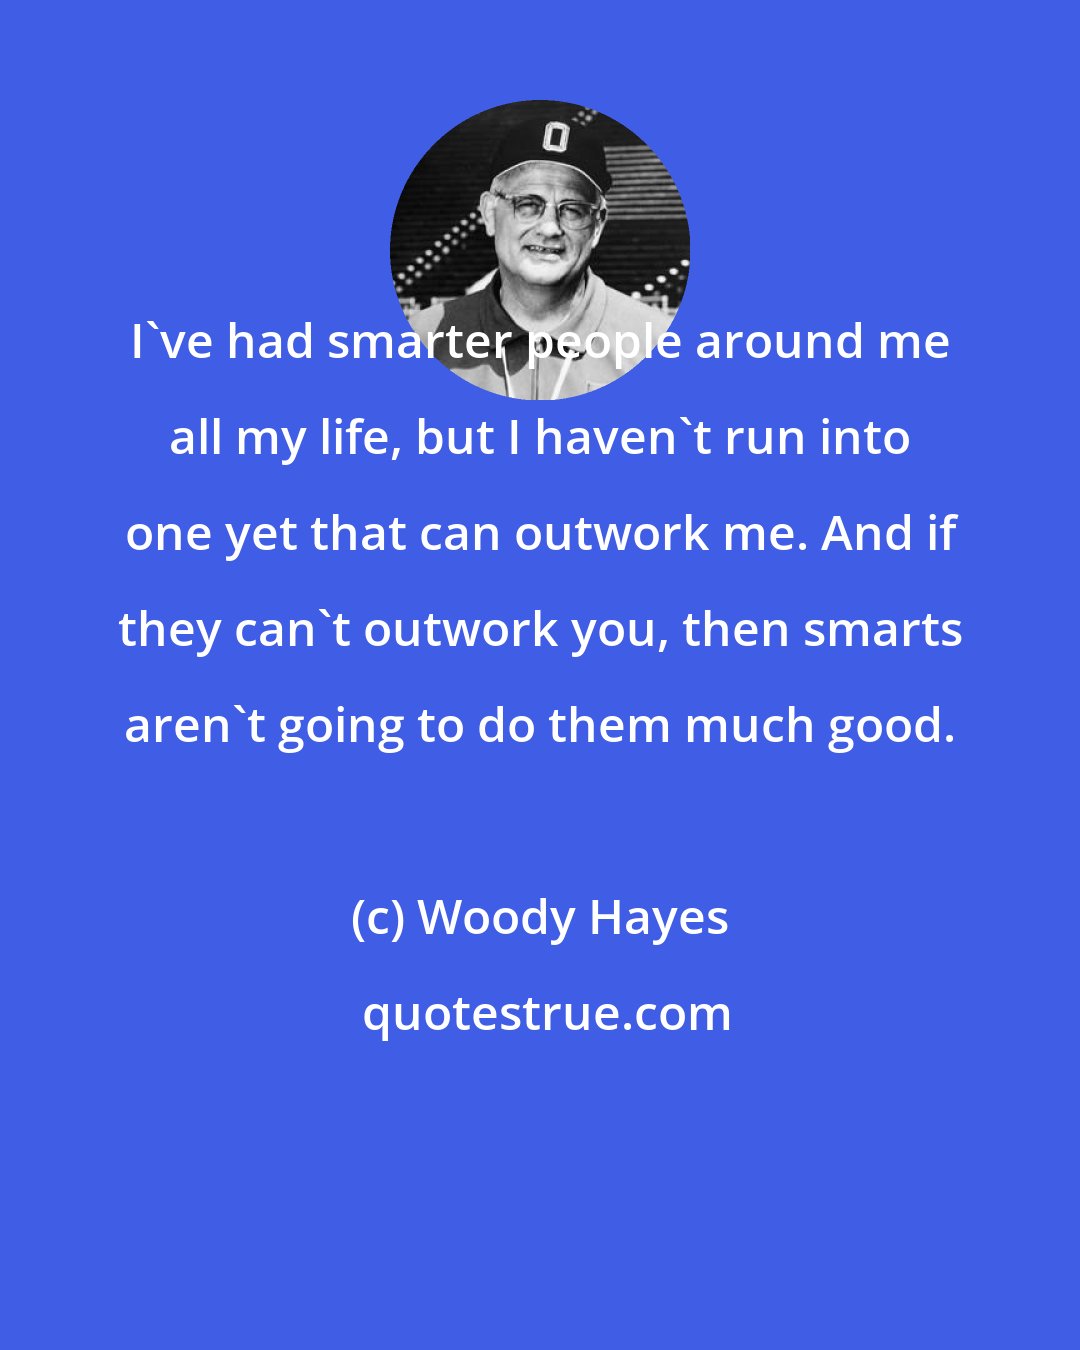 Woody Hayes: I've had smarter people around me all my life, but I haven't run into one yet that can outwork me. And if they can't outwork you, then smarts aren't going to do them much good.